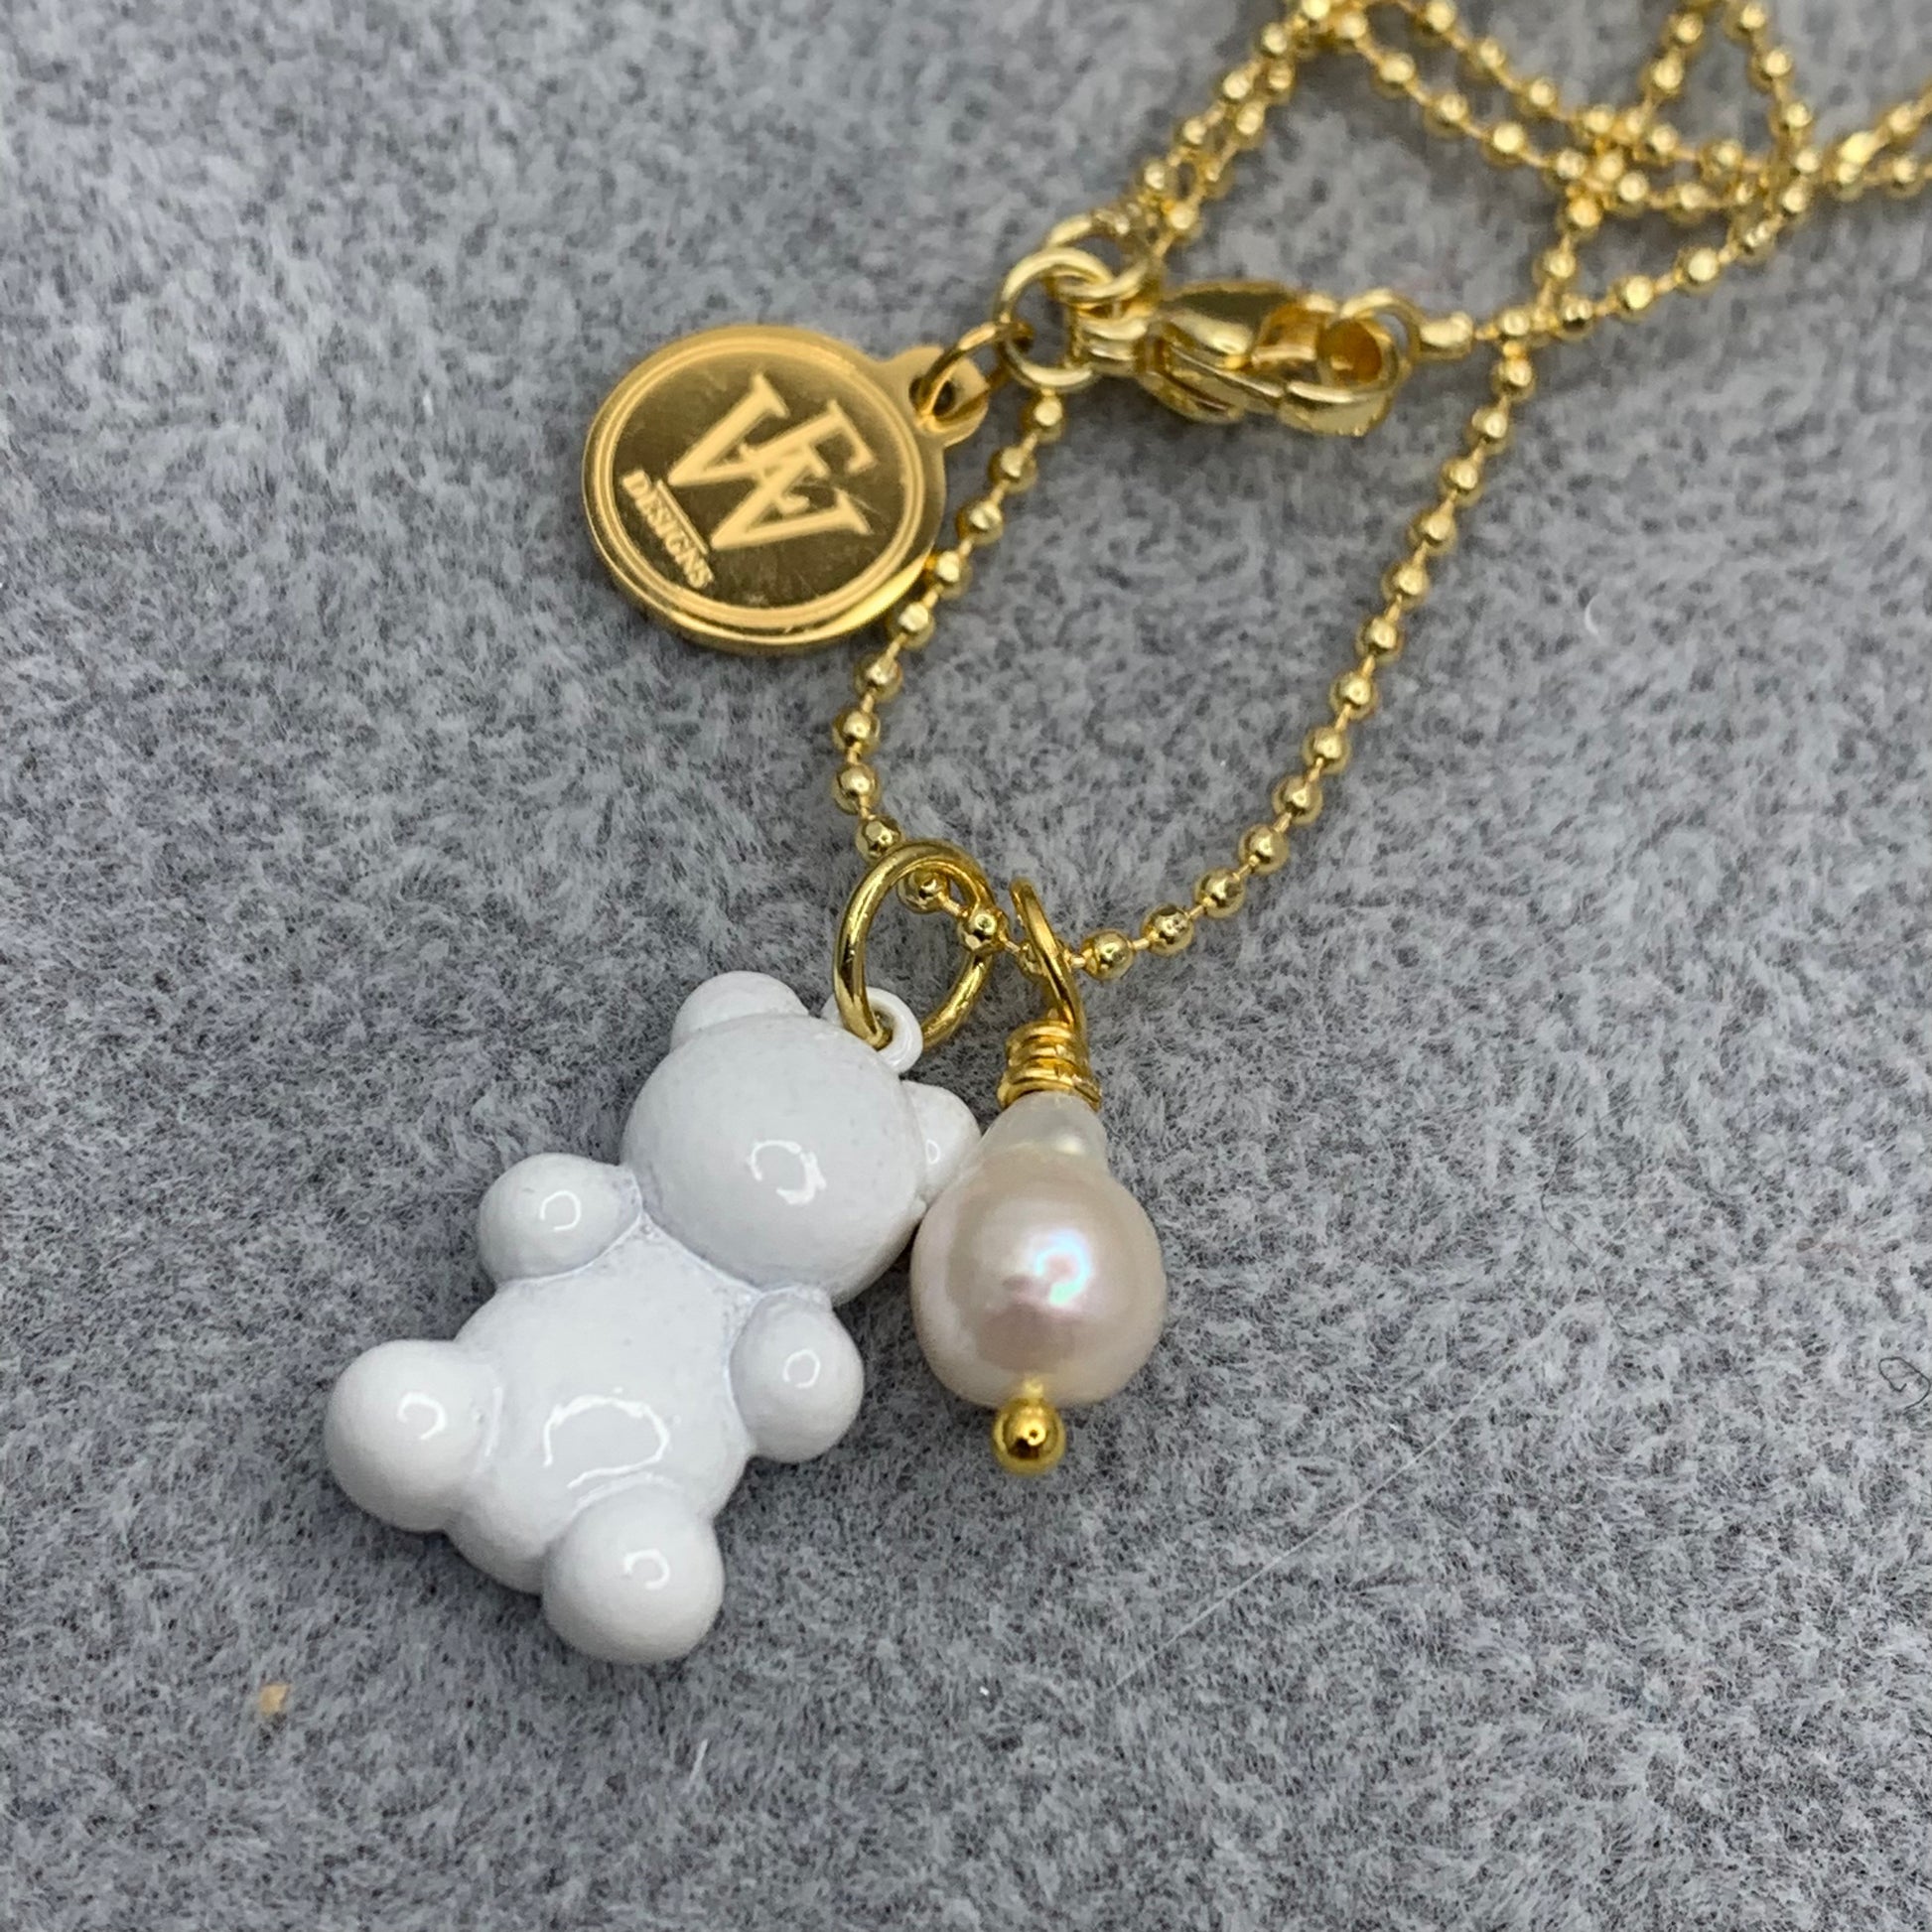 Ball and chain necklace with white enameled gummy bear pendant